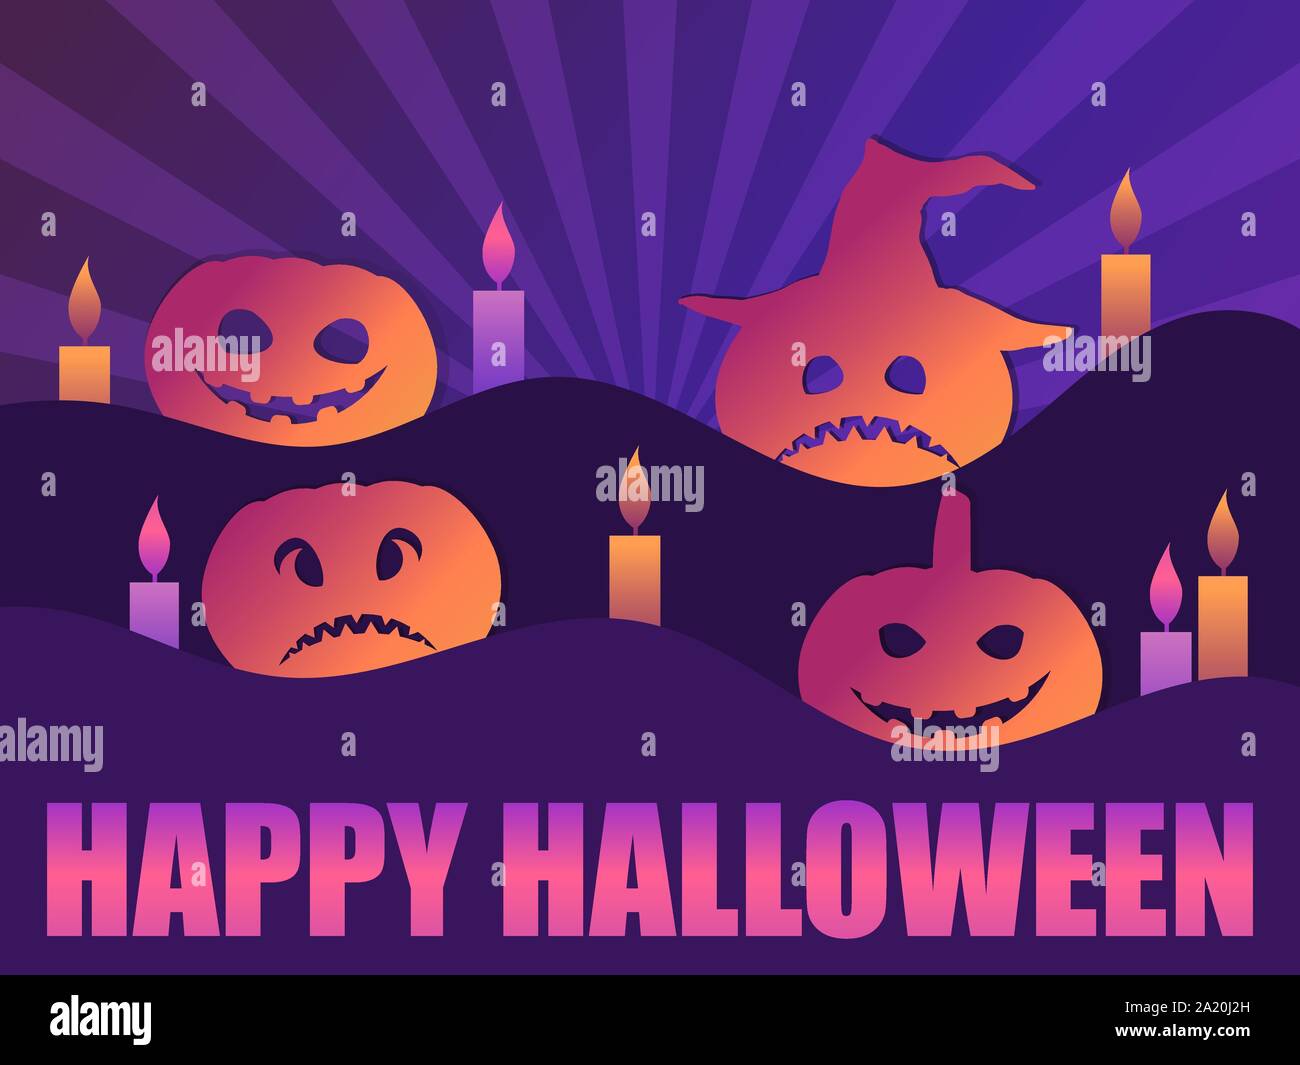 Happy Halloween, October 31st. Greeting card with Scary pumpkins and ...